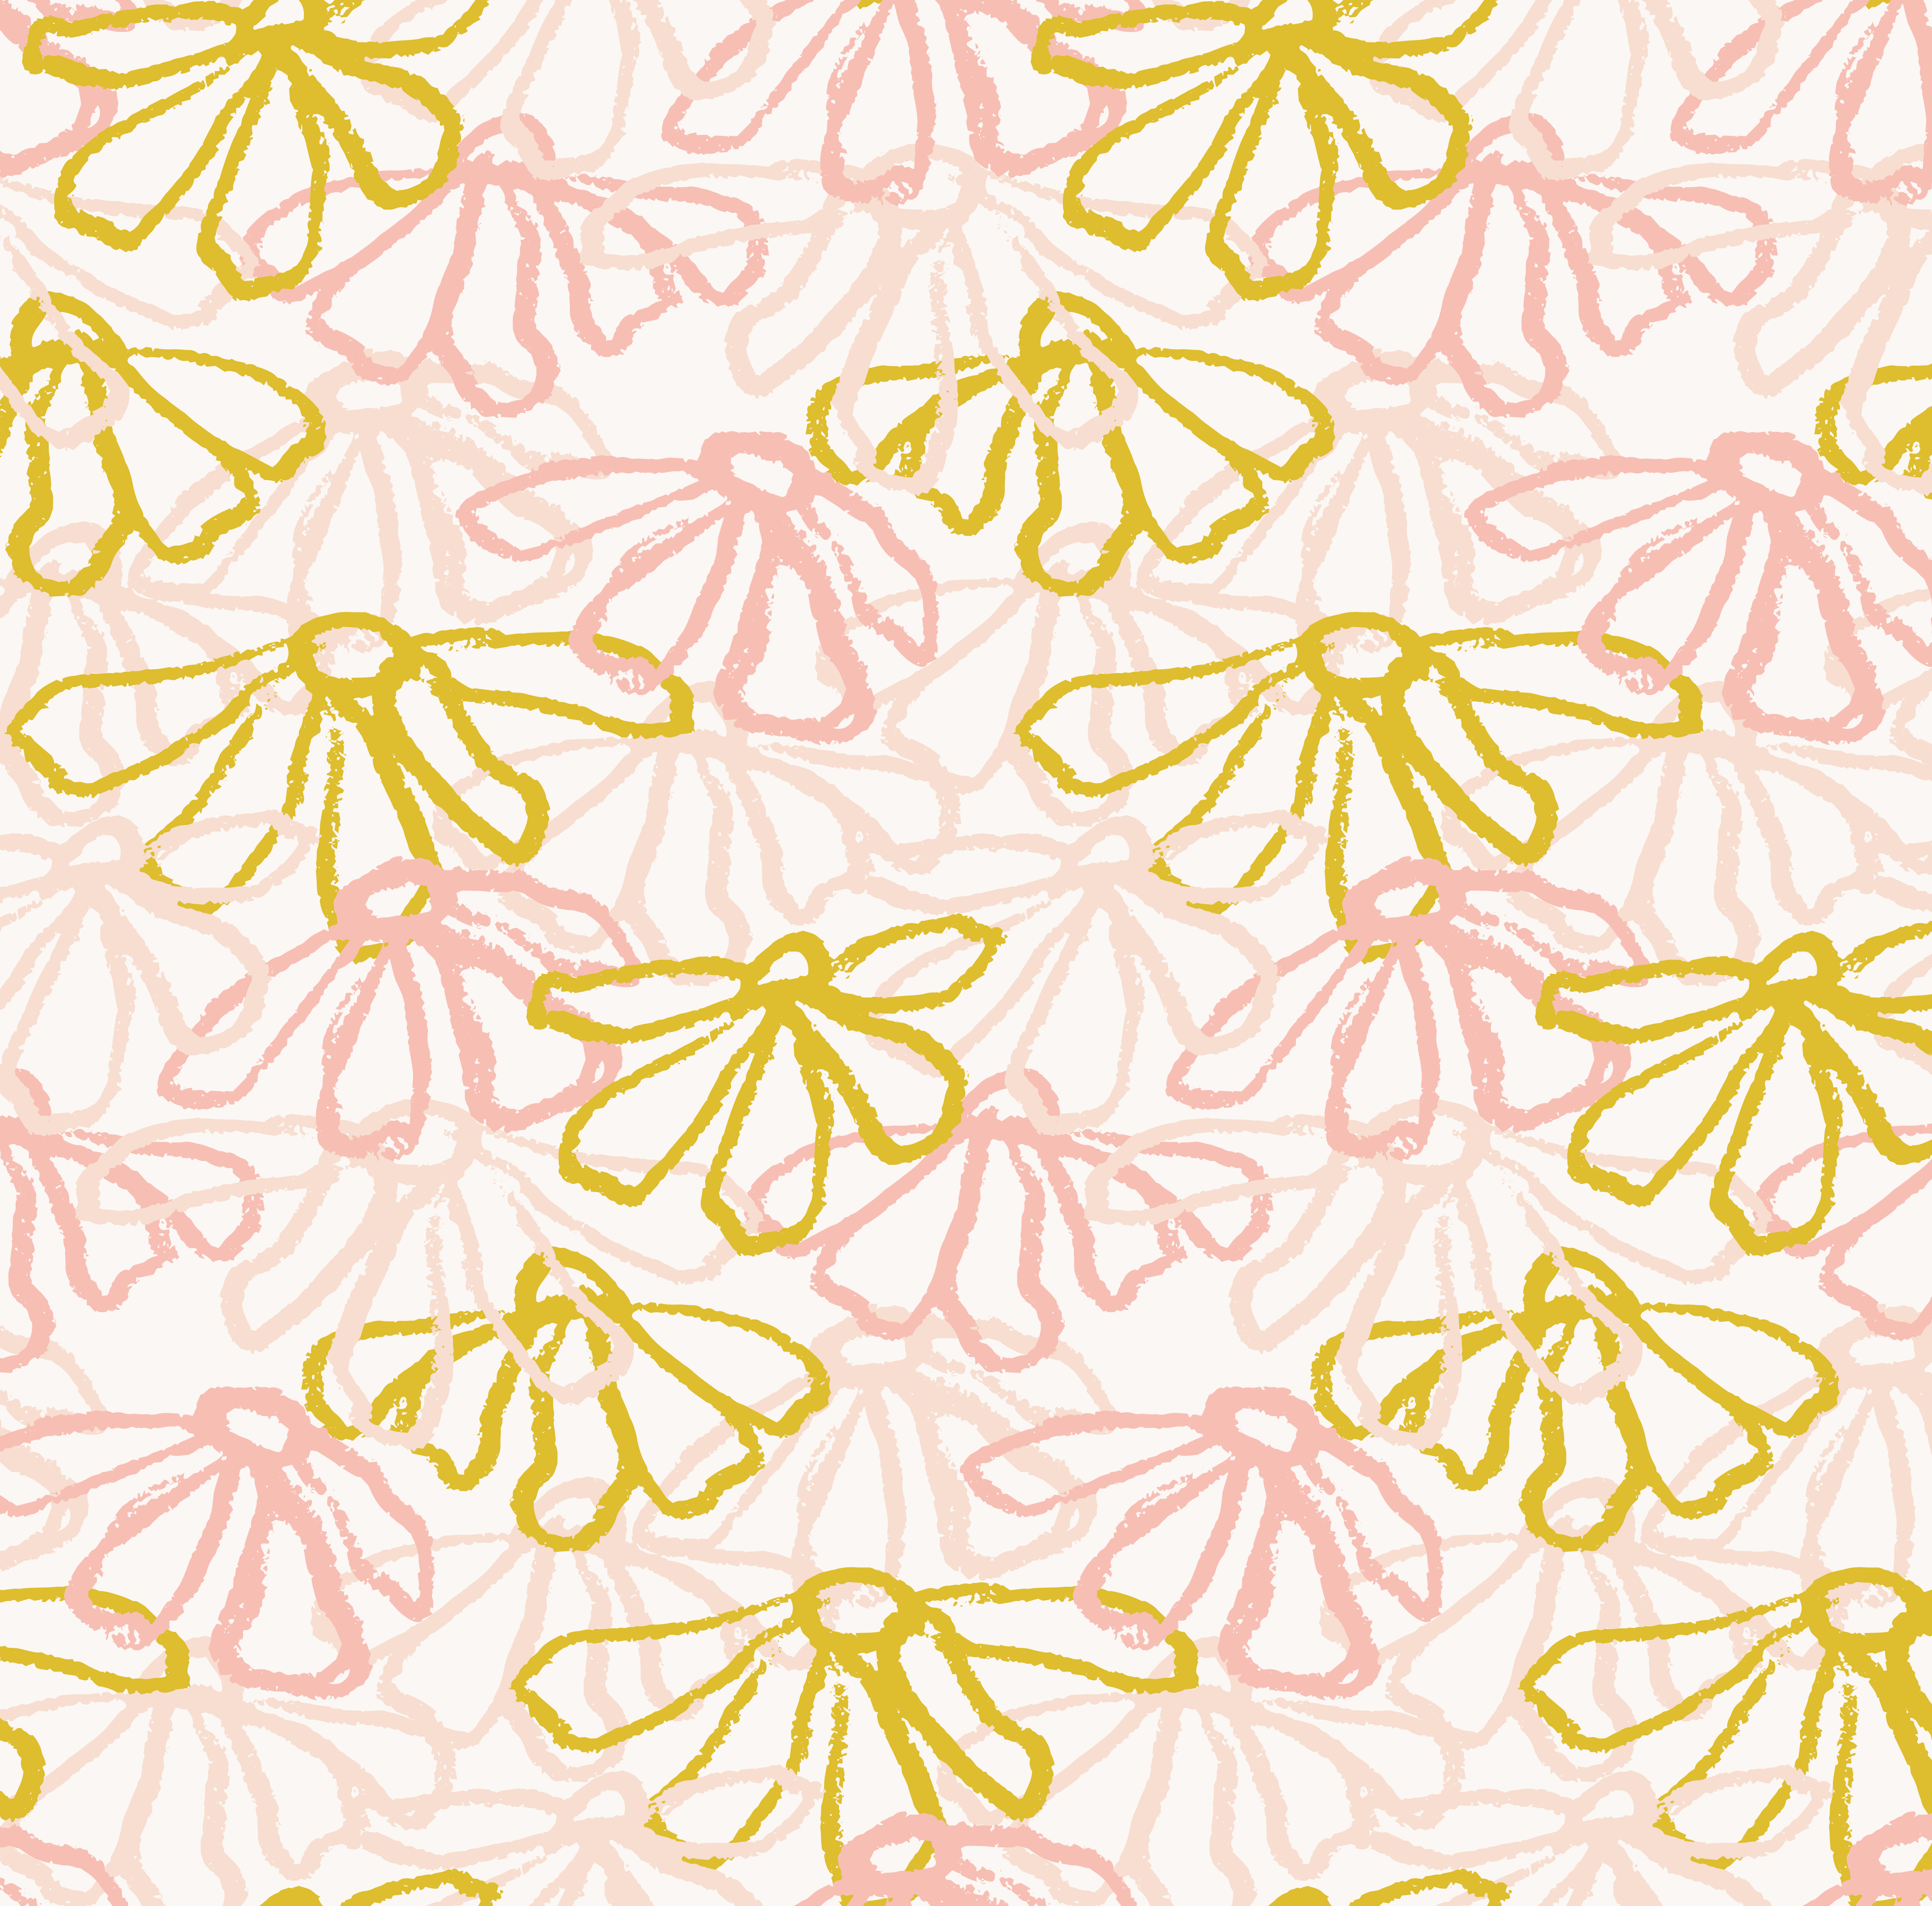 Daisy Craze Wrapping Paper